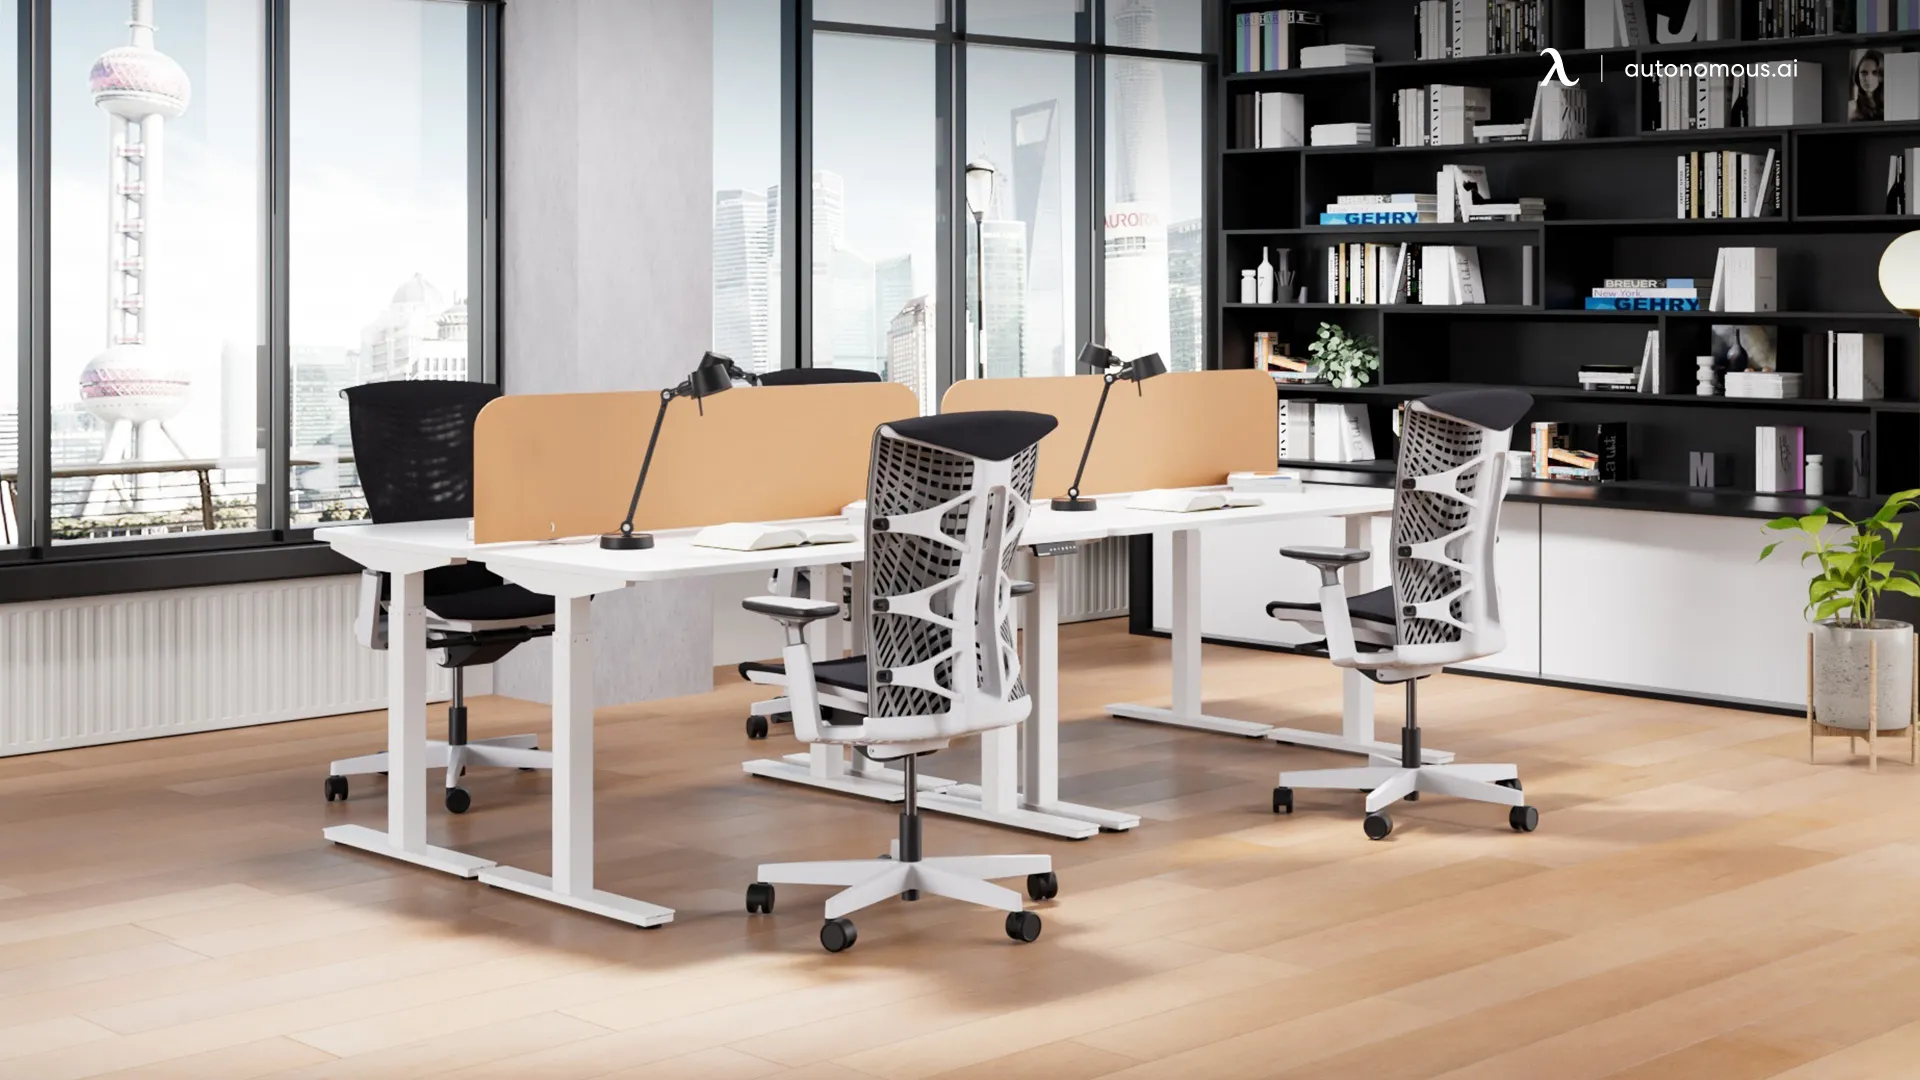 The Benefits of Ergonomic Office Furniture for Business Spaces